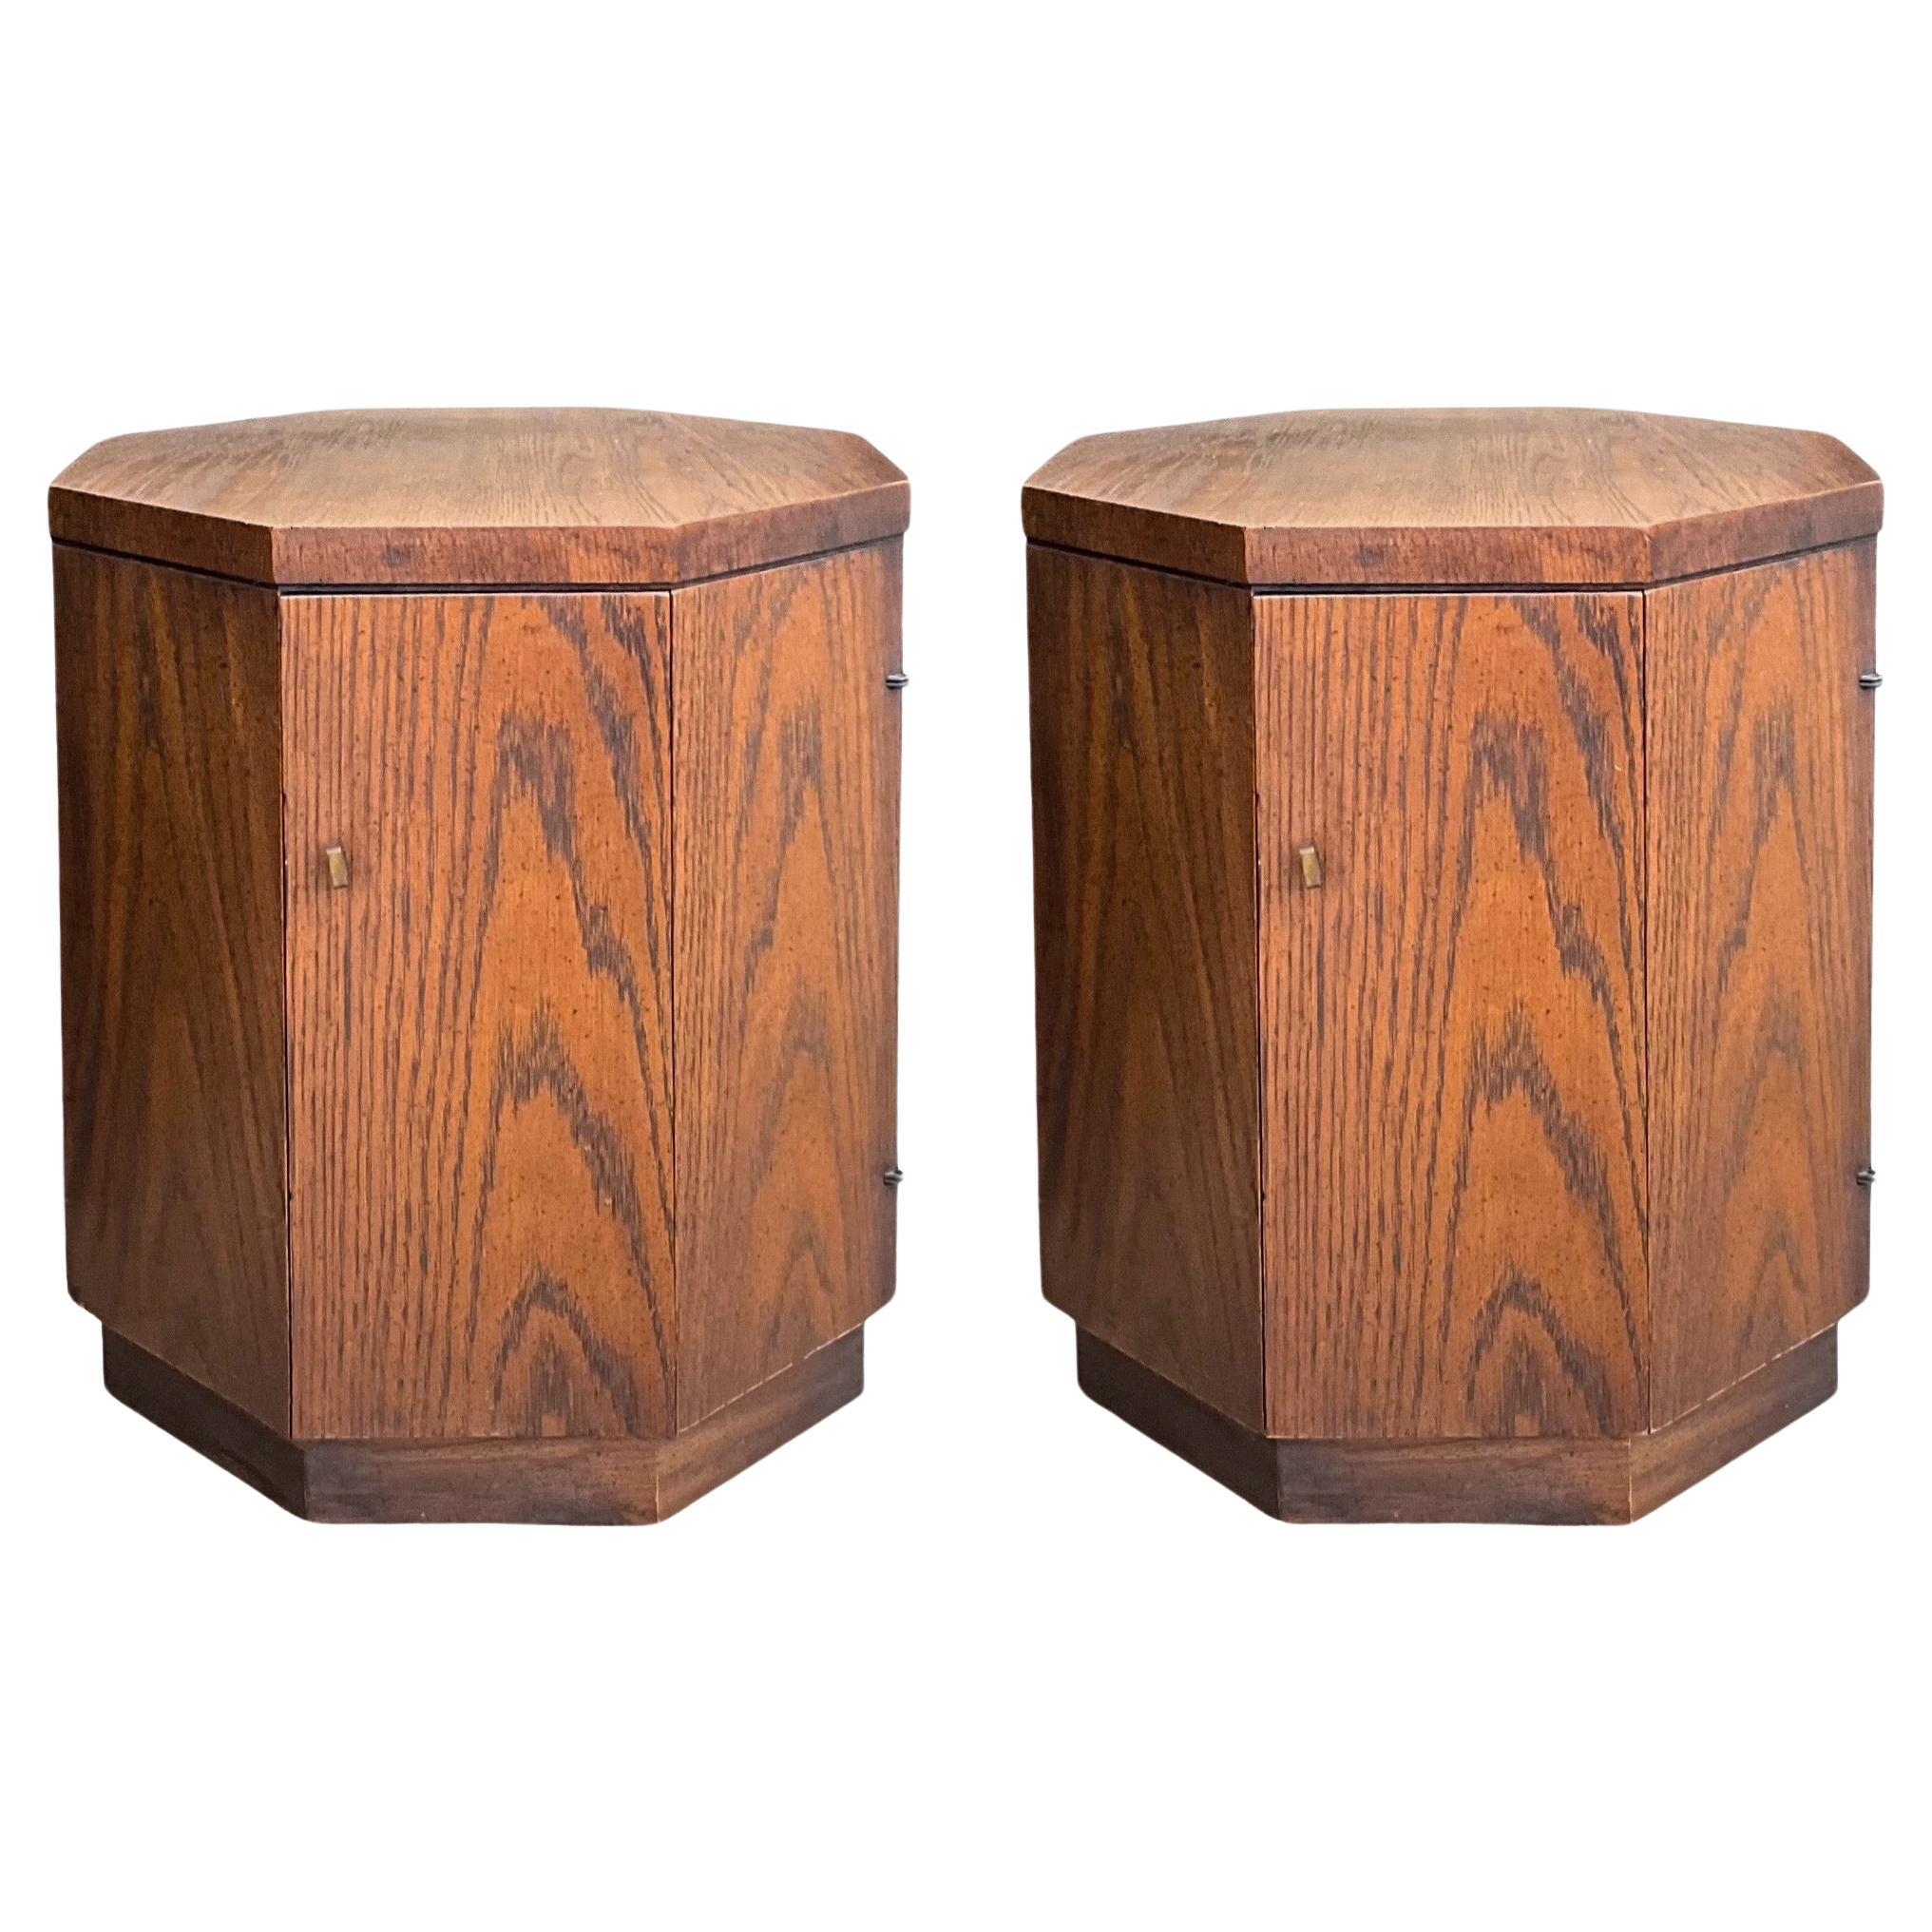 Mid-Century Modern Fruitwood Side Cylinder Tables With Storage Att. To Drexel For Sale